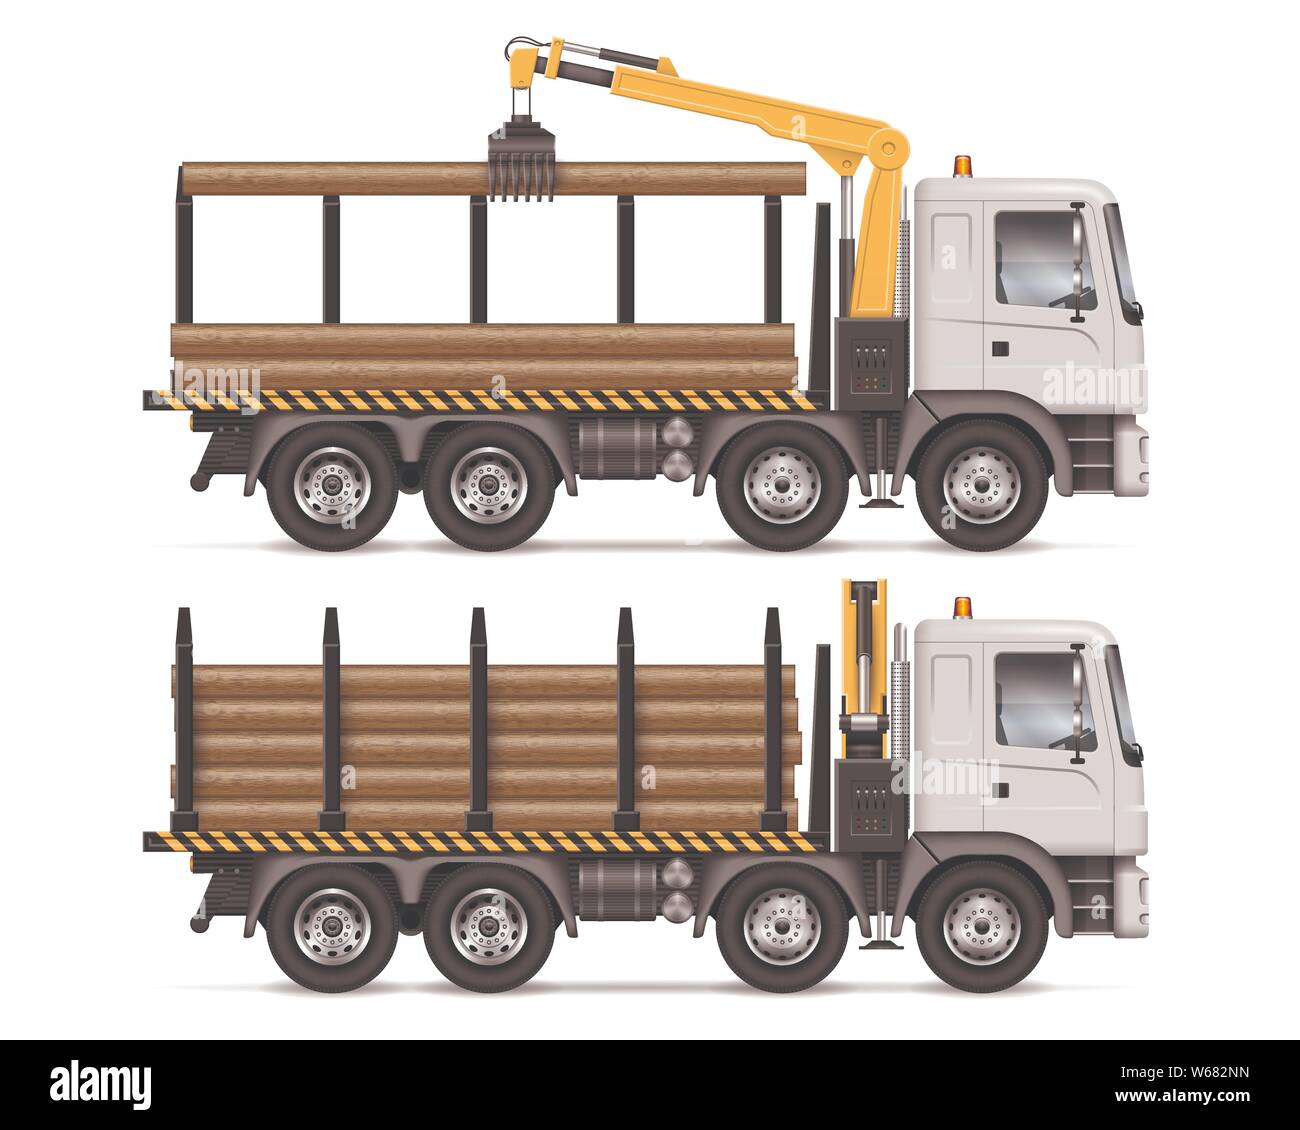 Logging truck side view isolated on white background. Forestry and wood production vehicle vector mockup. All elements in groups on separate layers Stock Vector